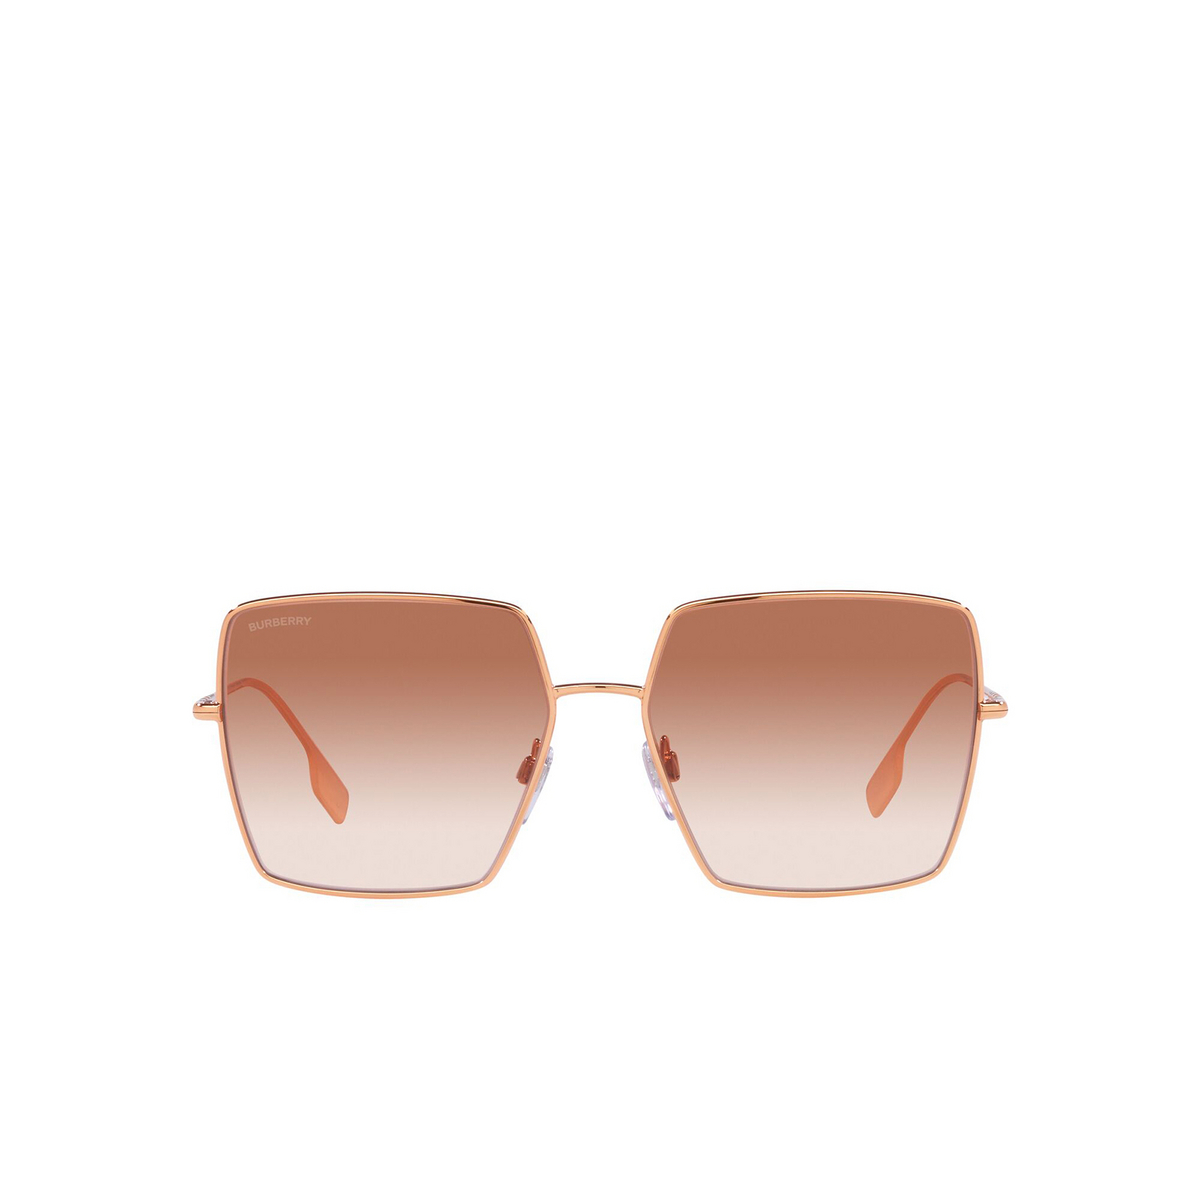 Burberry DAPHNE Sunglasses 133713 Rose Gold - front view